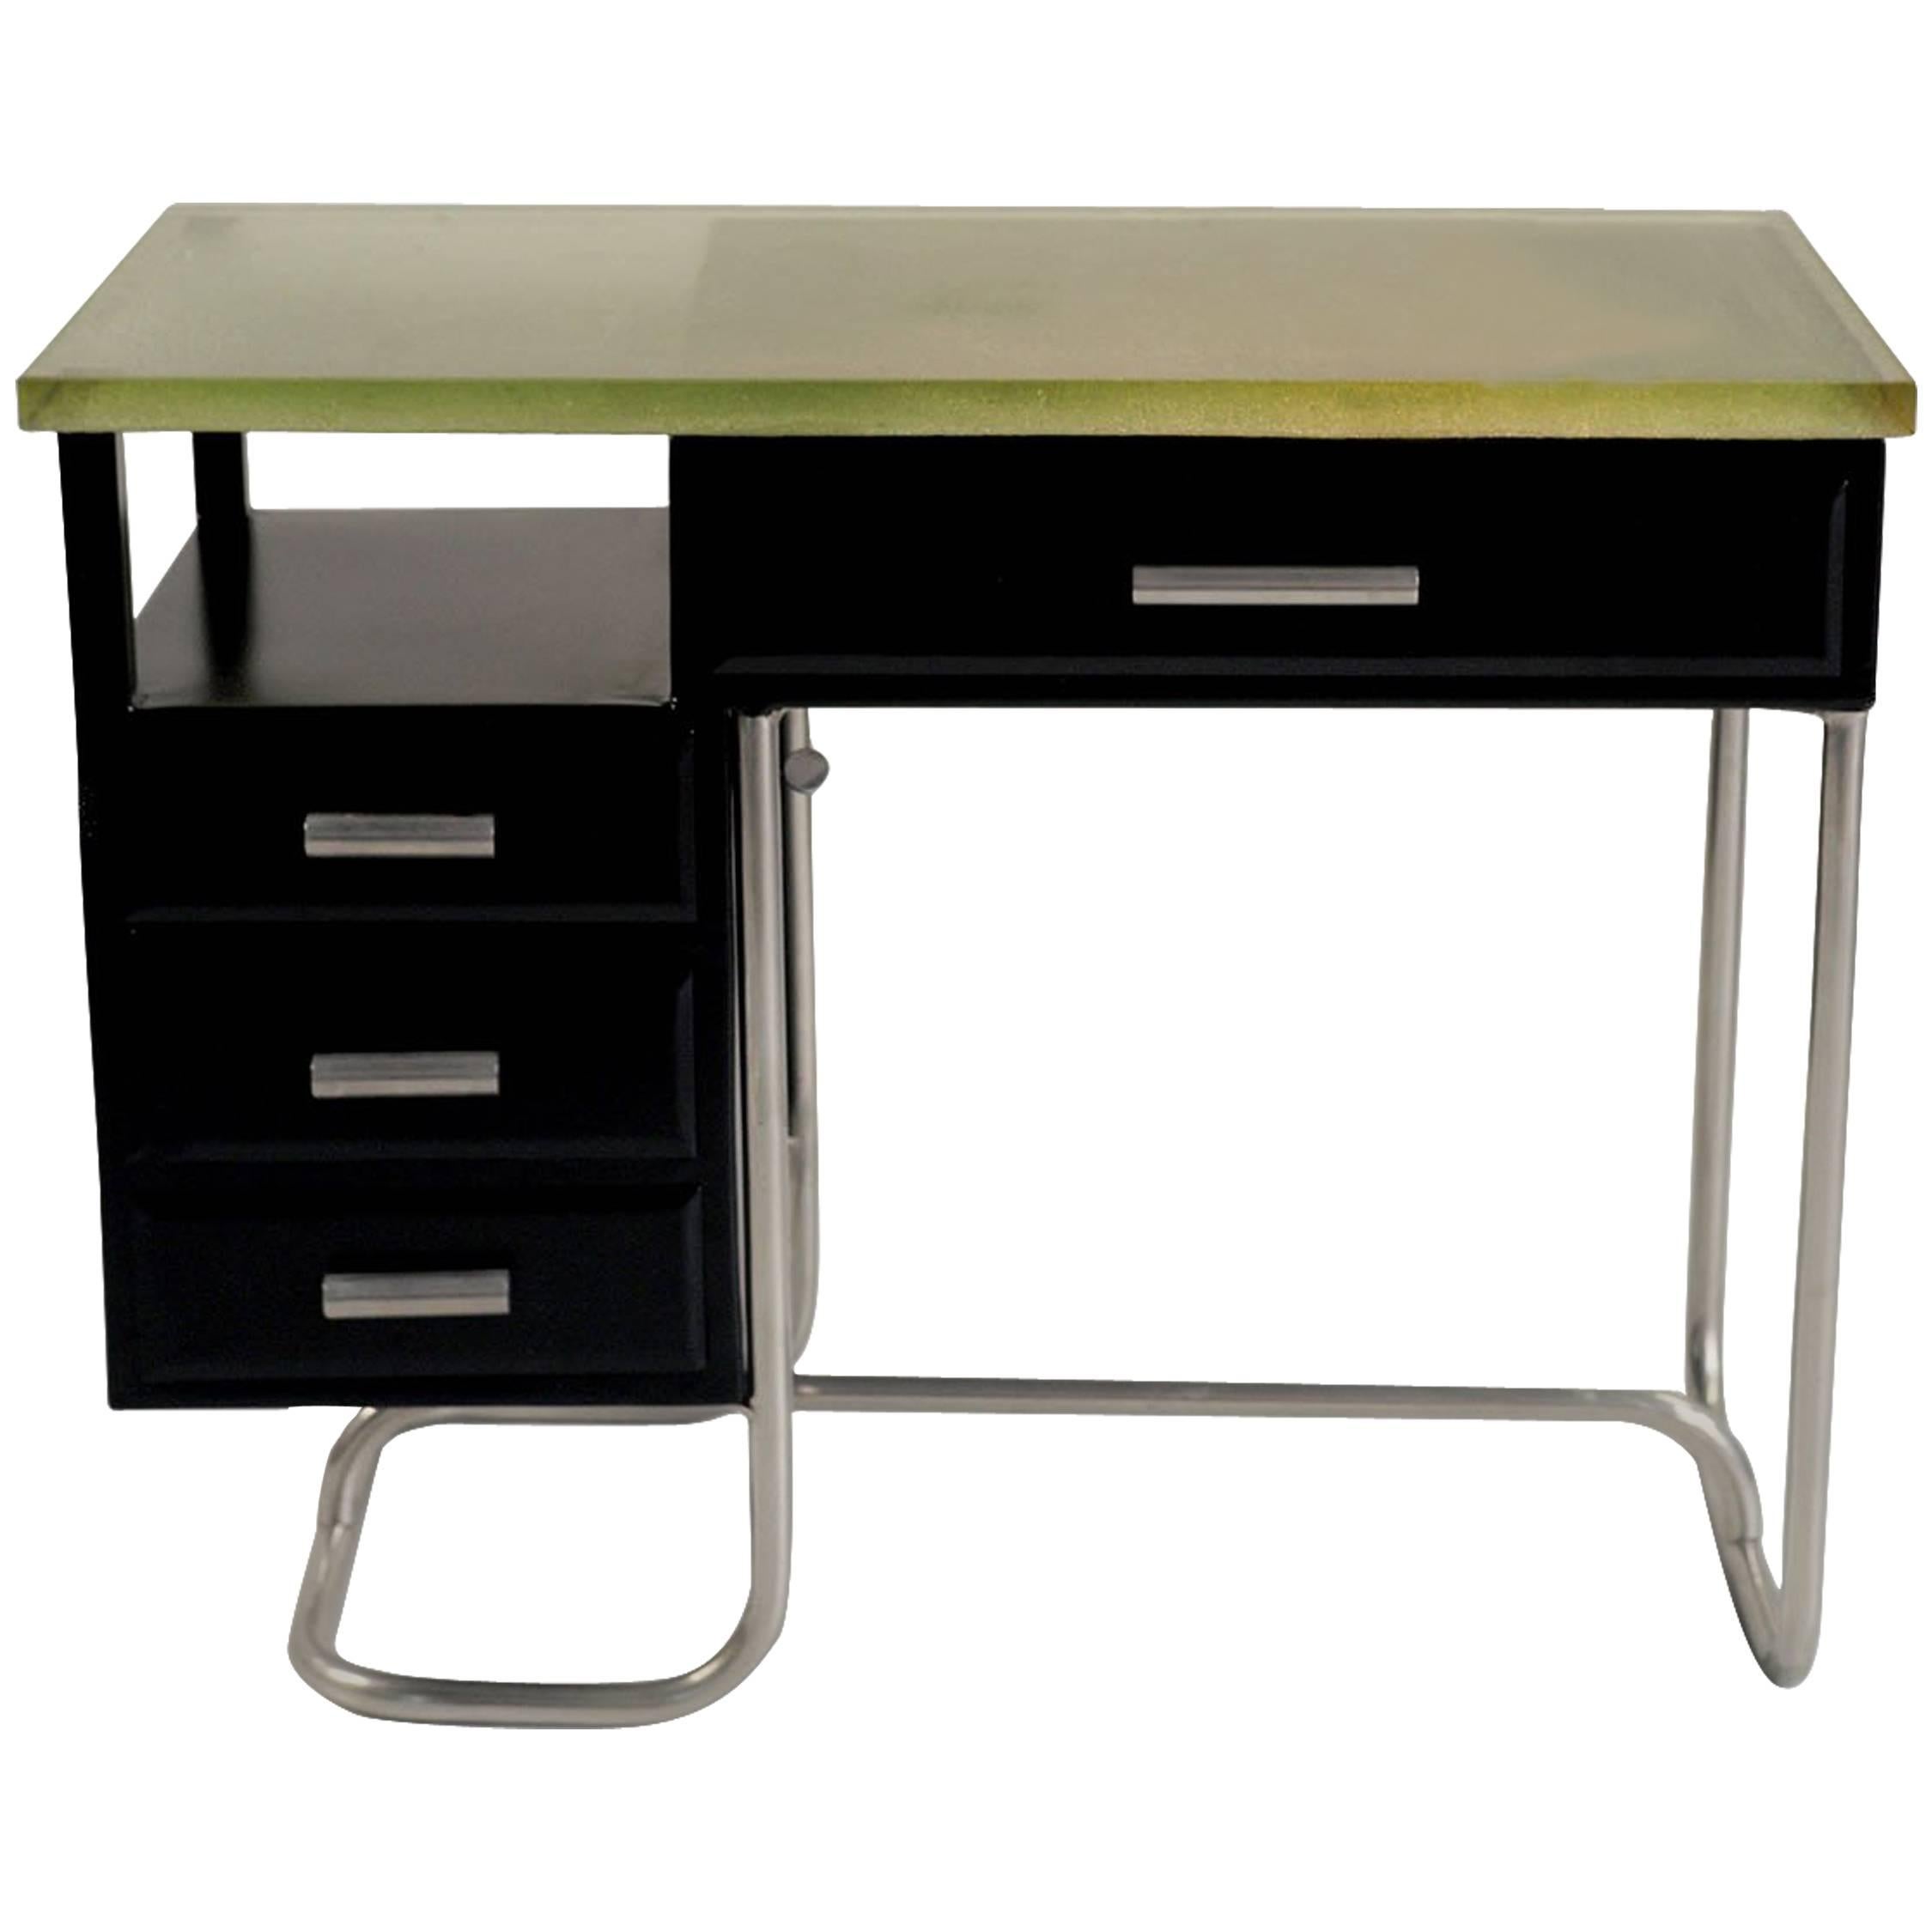 Tubular Desk in Black Lacquered Metal and Glass Slab, 1930